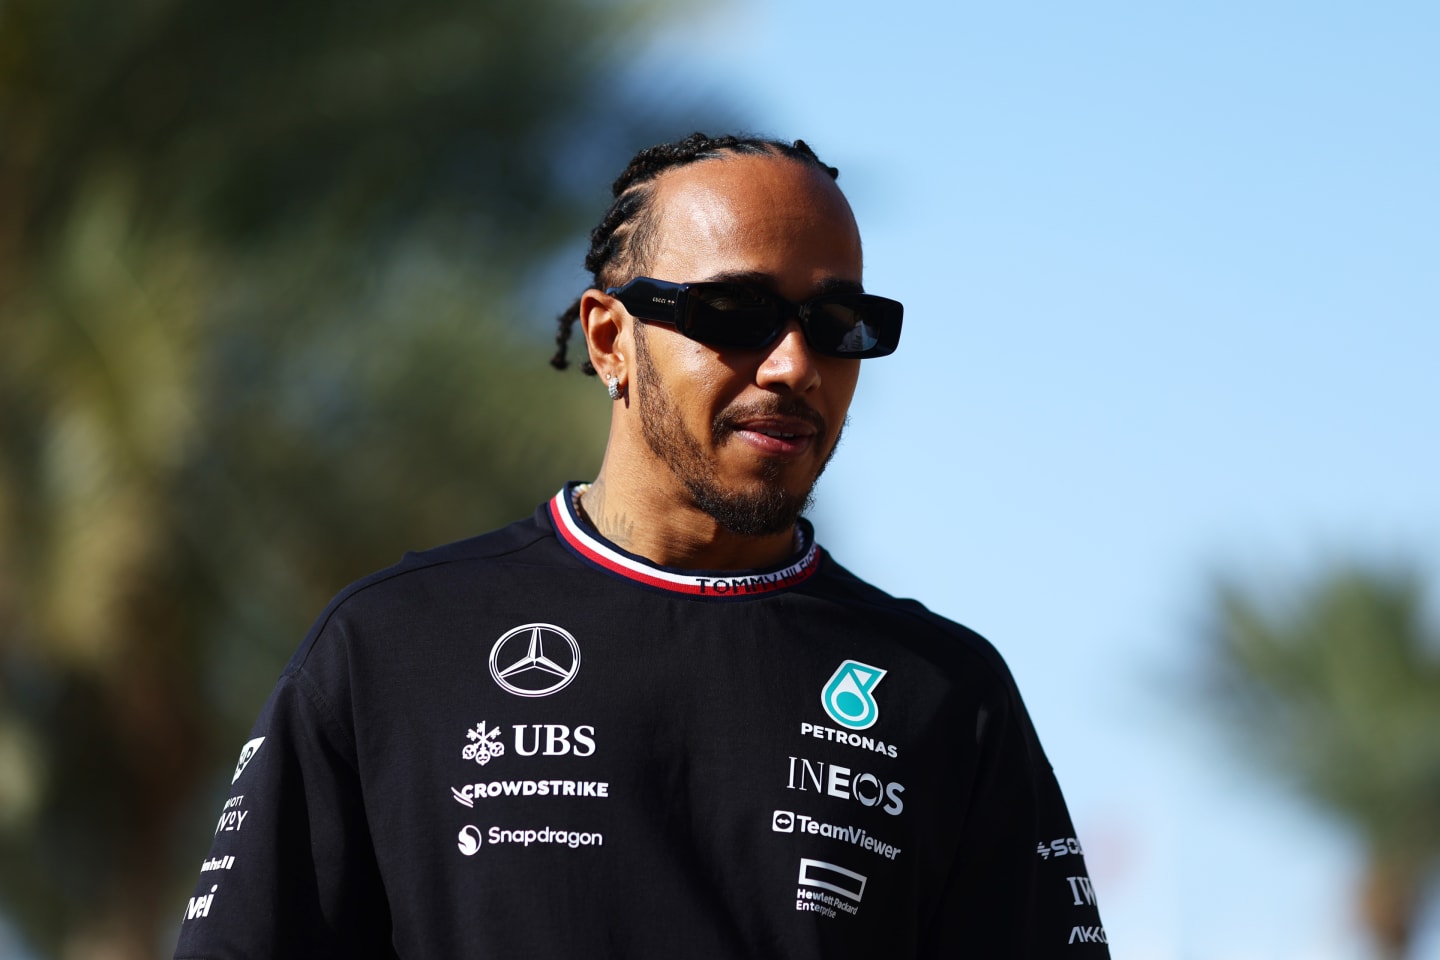 BAHRAIN, BAHRAIN - FEBRUARY 28: Lewis Hamilton of Great Britain and Mercedes walks in the Paddock